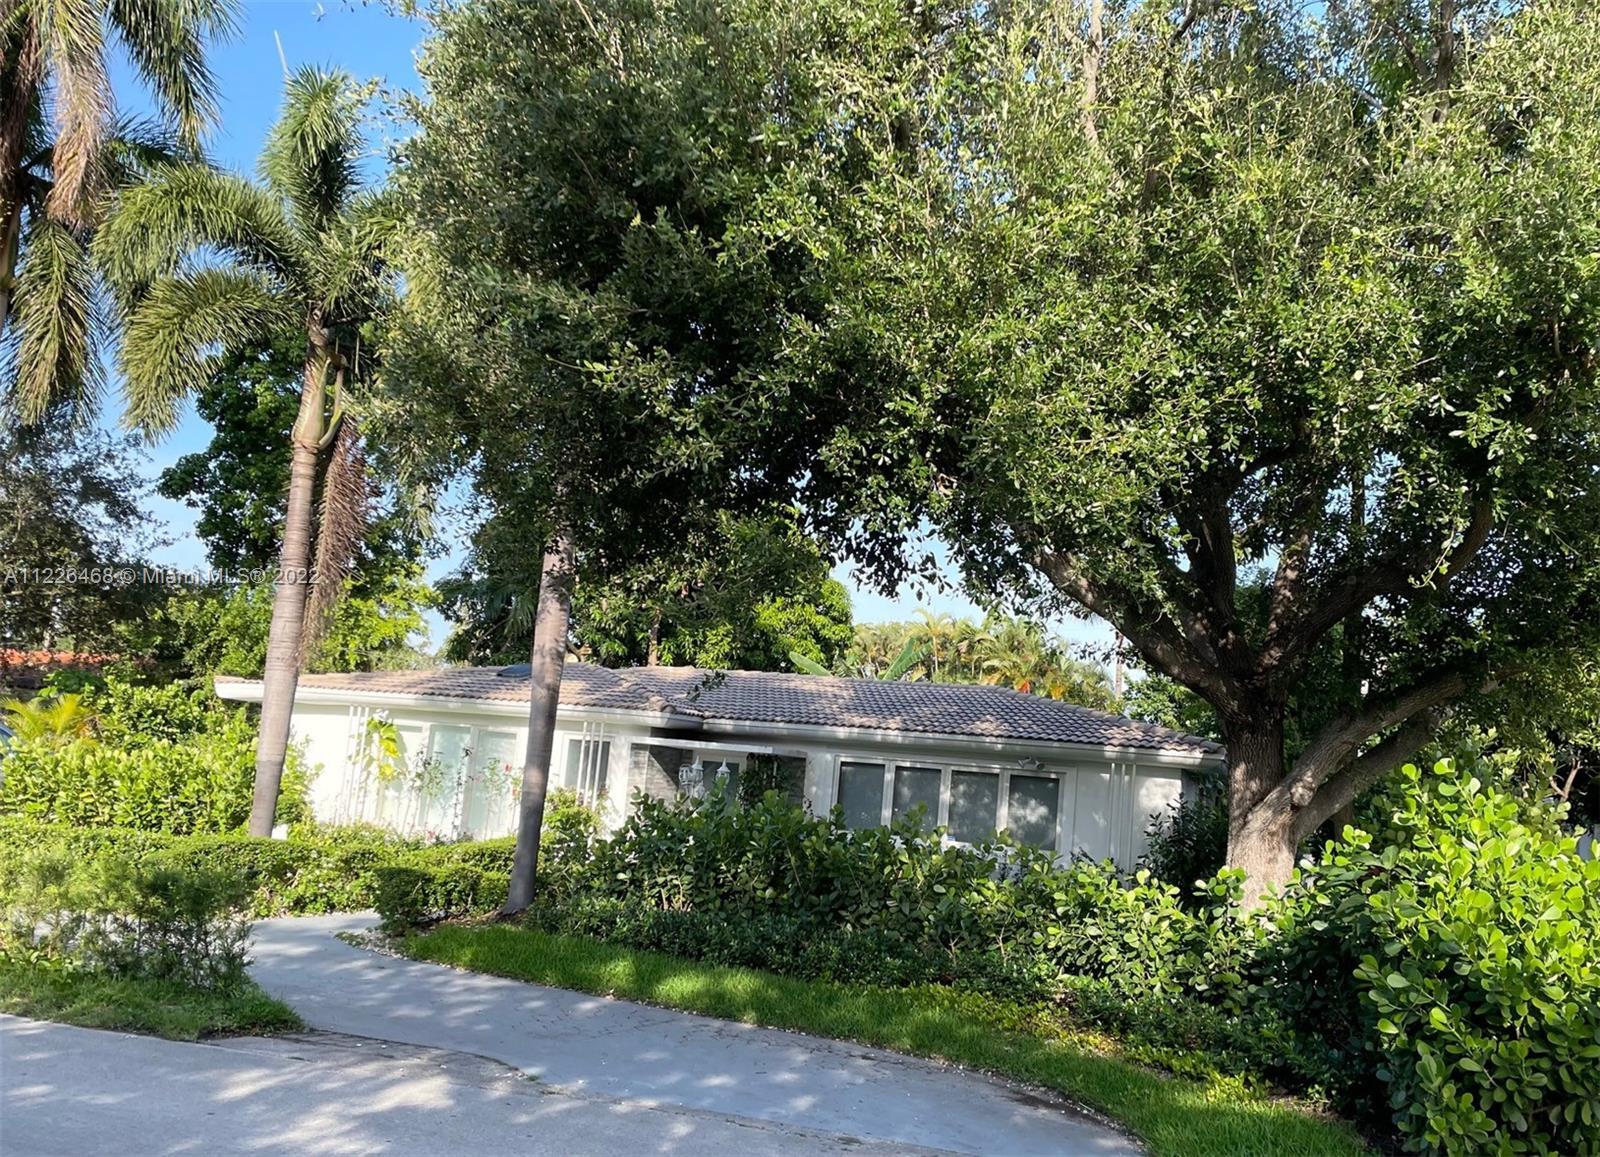 4 great rooms and 2 full baths in Miami Shores Estates! Curb appeal and plenty of parking. Open pati